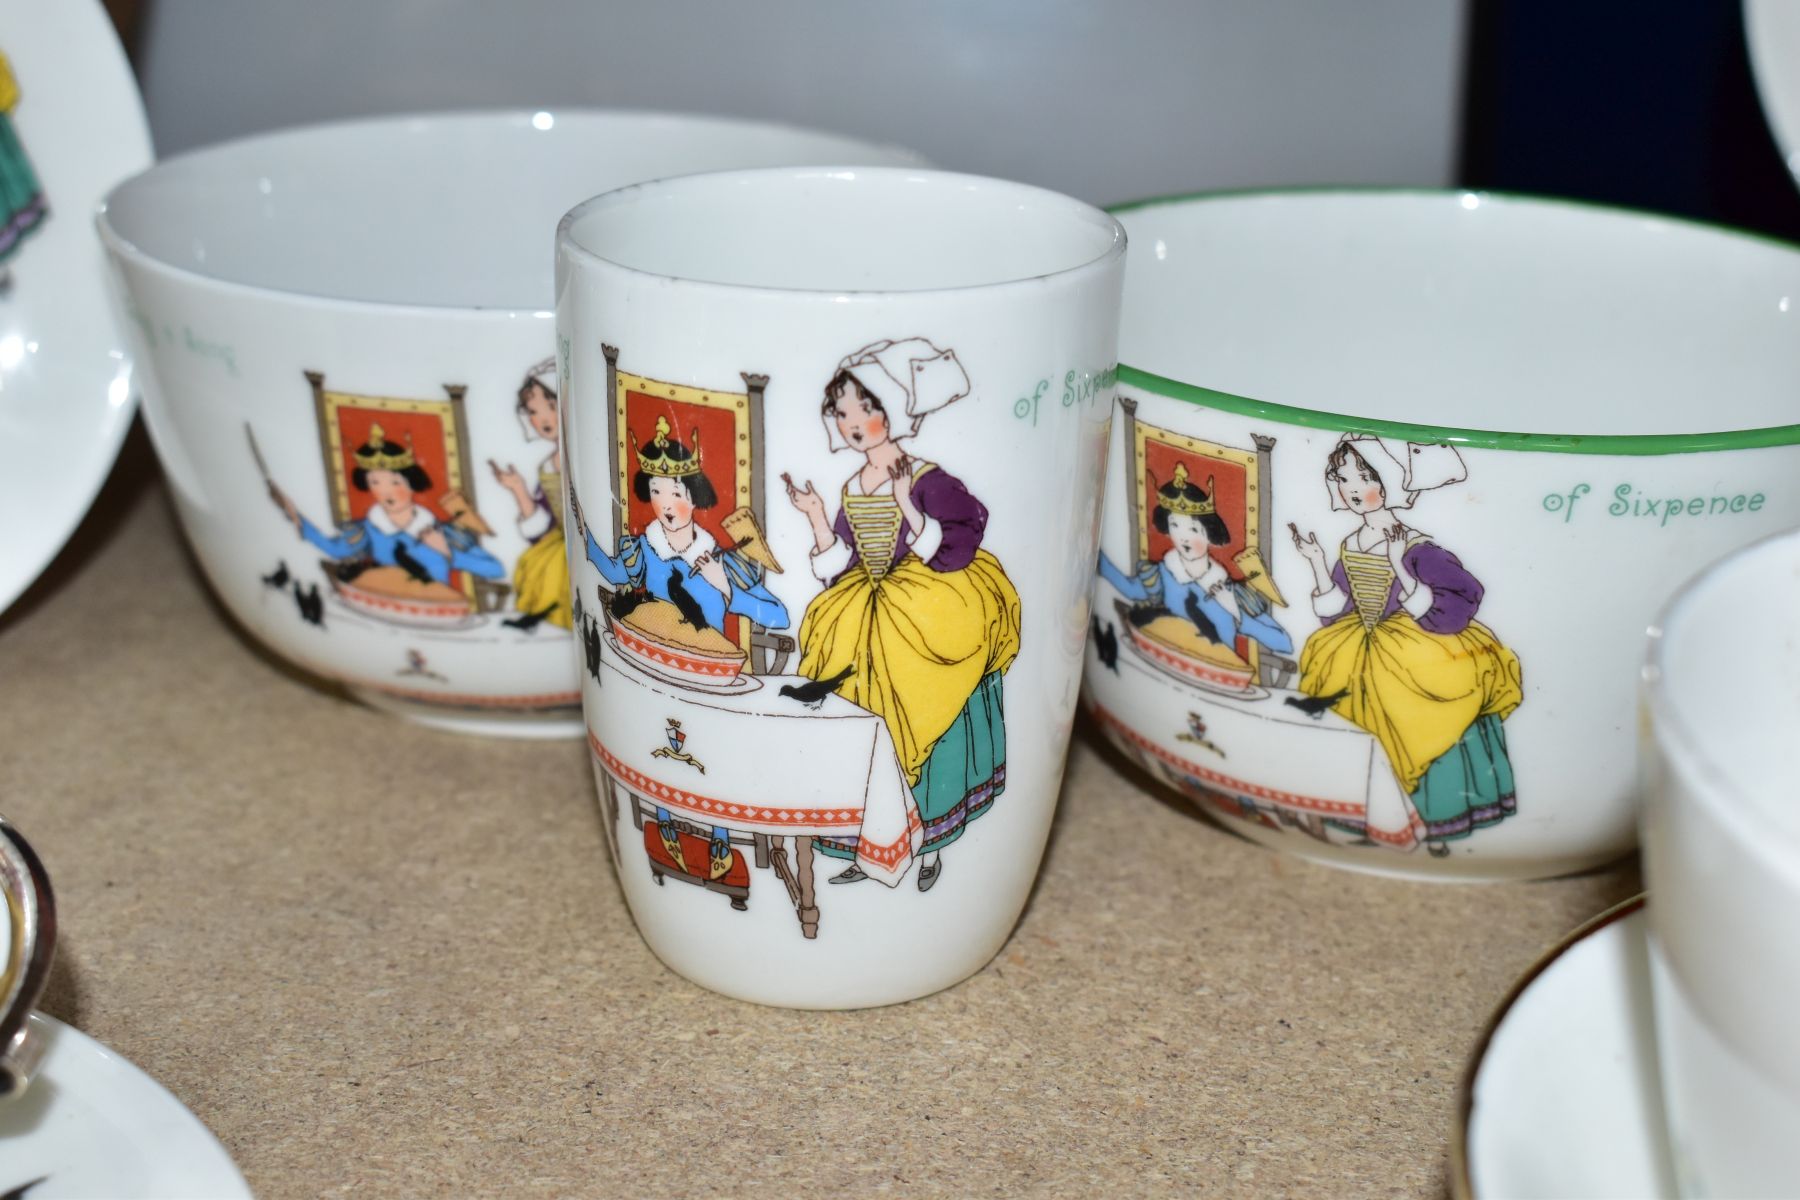 NINE PIECES OF ROYAL DOULTON CHINA NURSERY RHYMES SERIES WARE DESIGNED BY WILLIAM SAVAGE COOPER - Image 5 of 7